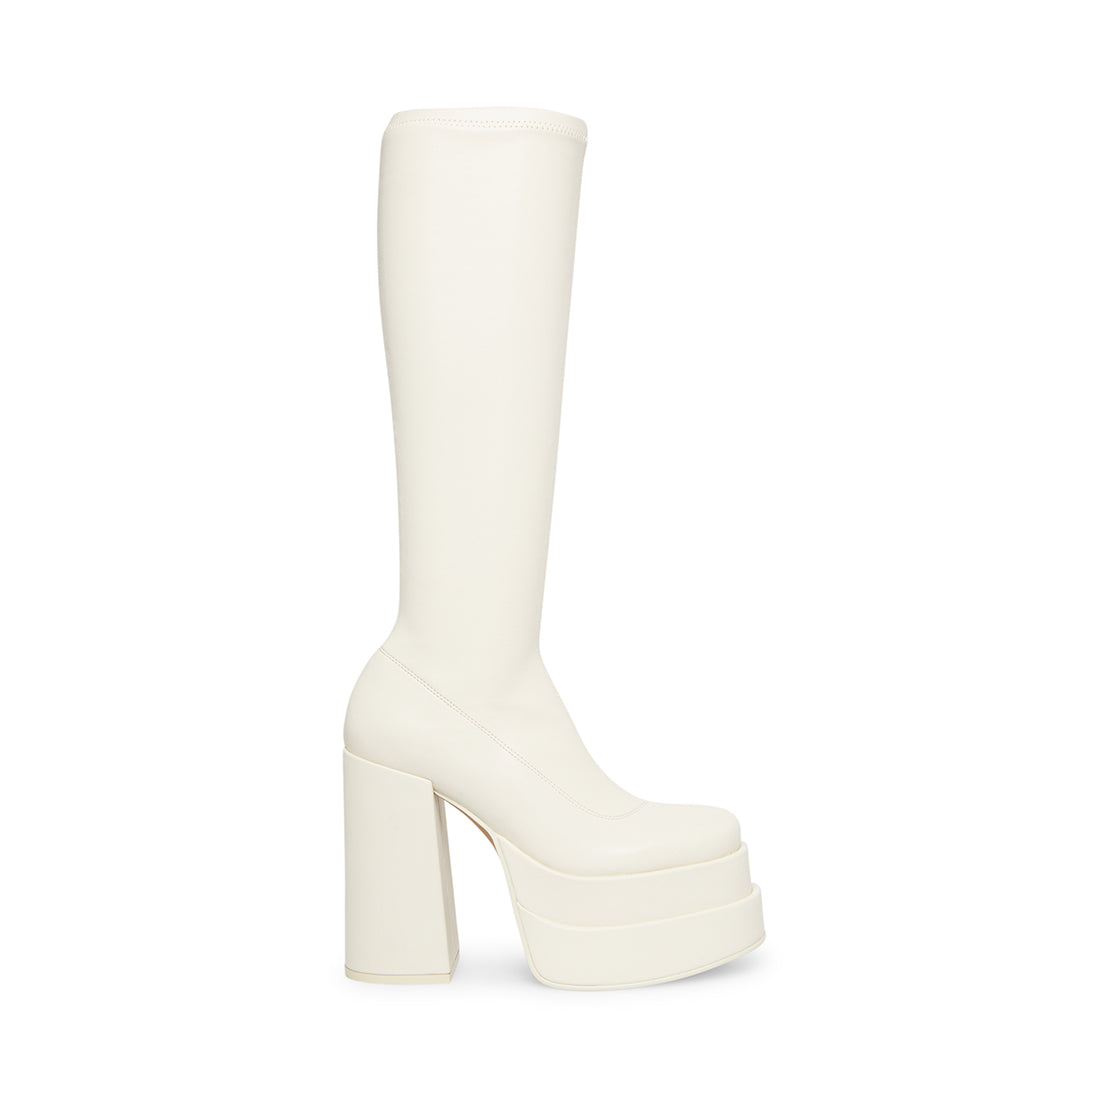 CYPRESS OFF/WHITE - SM REBOOTED – Steve Madden